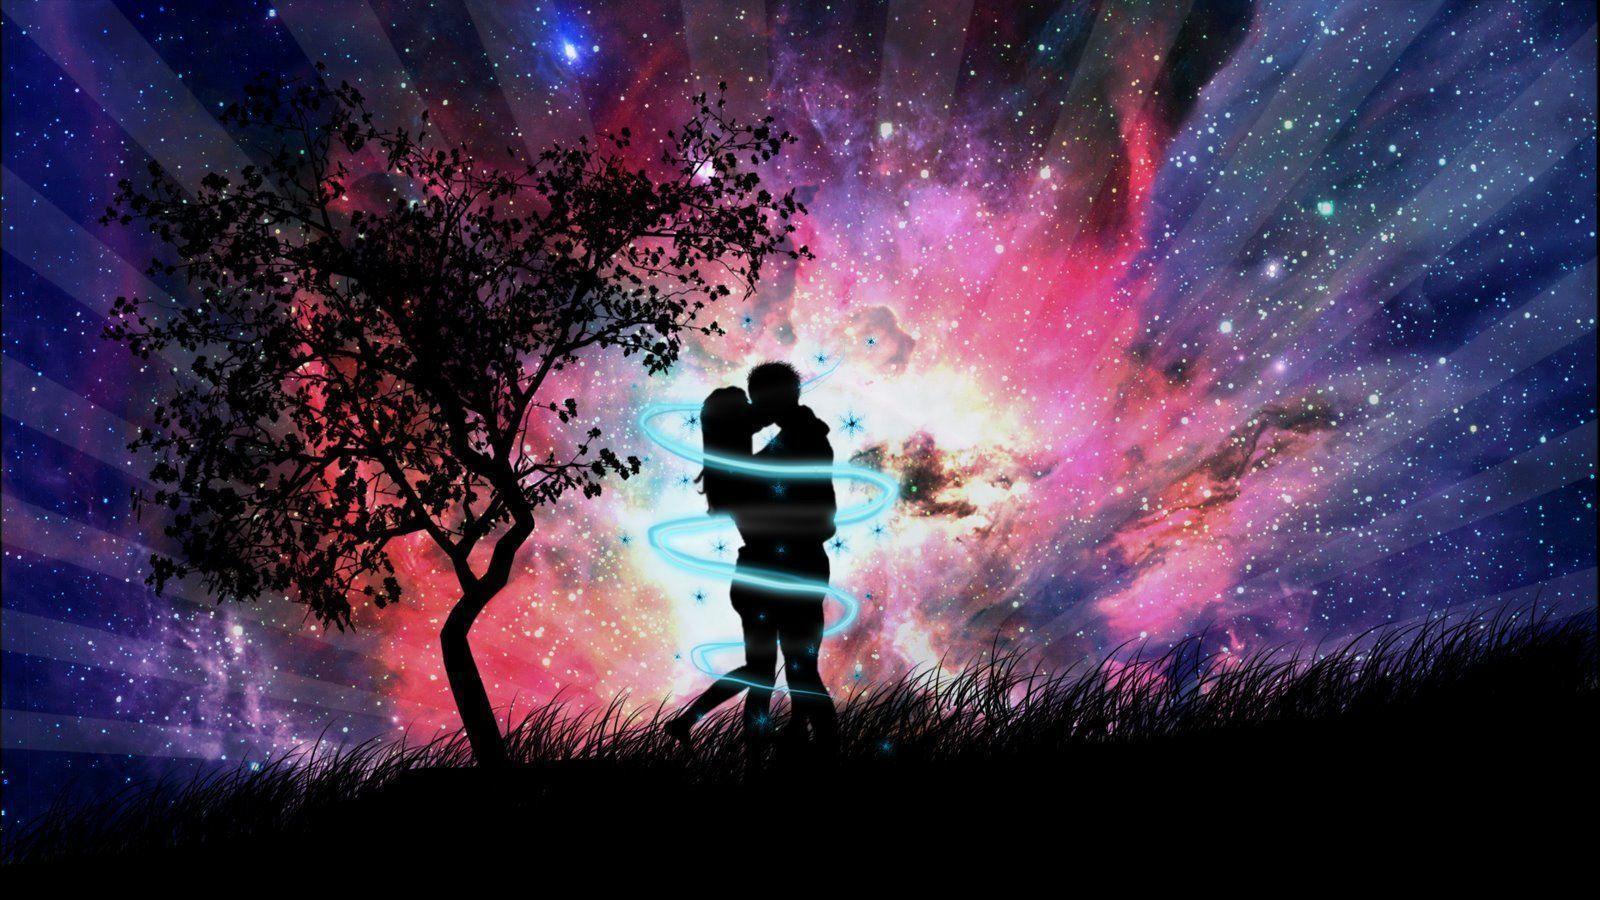 Discover the most romantic backgrounds to add pep to your computer or phone screen. Let the images bring you closer to your loved ones, and remind you of the power of true love.